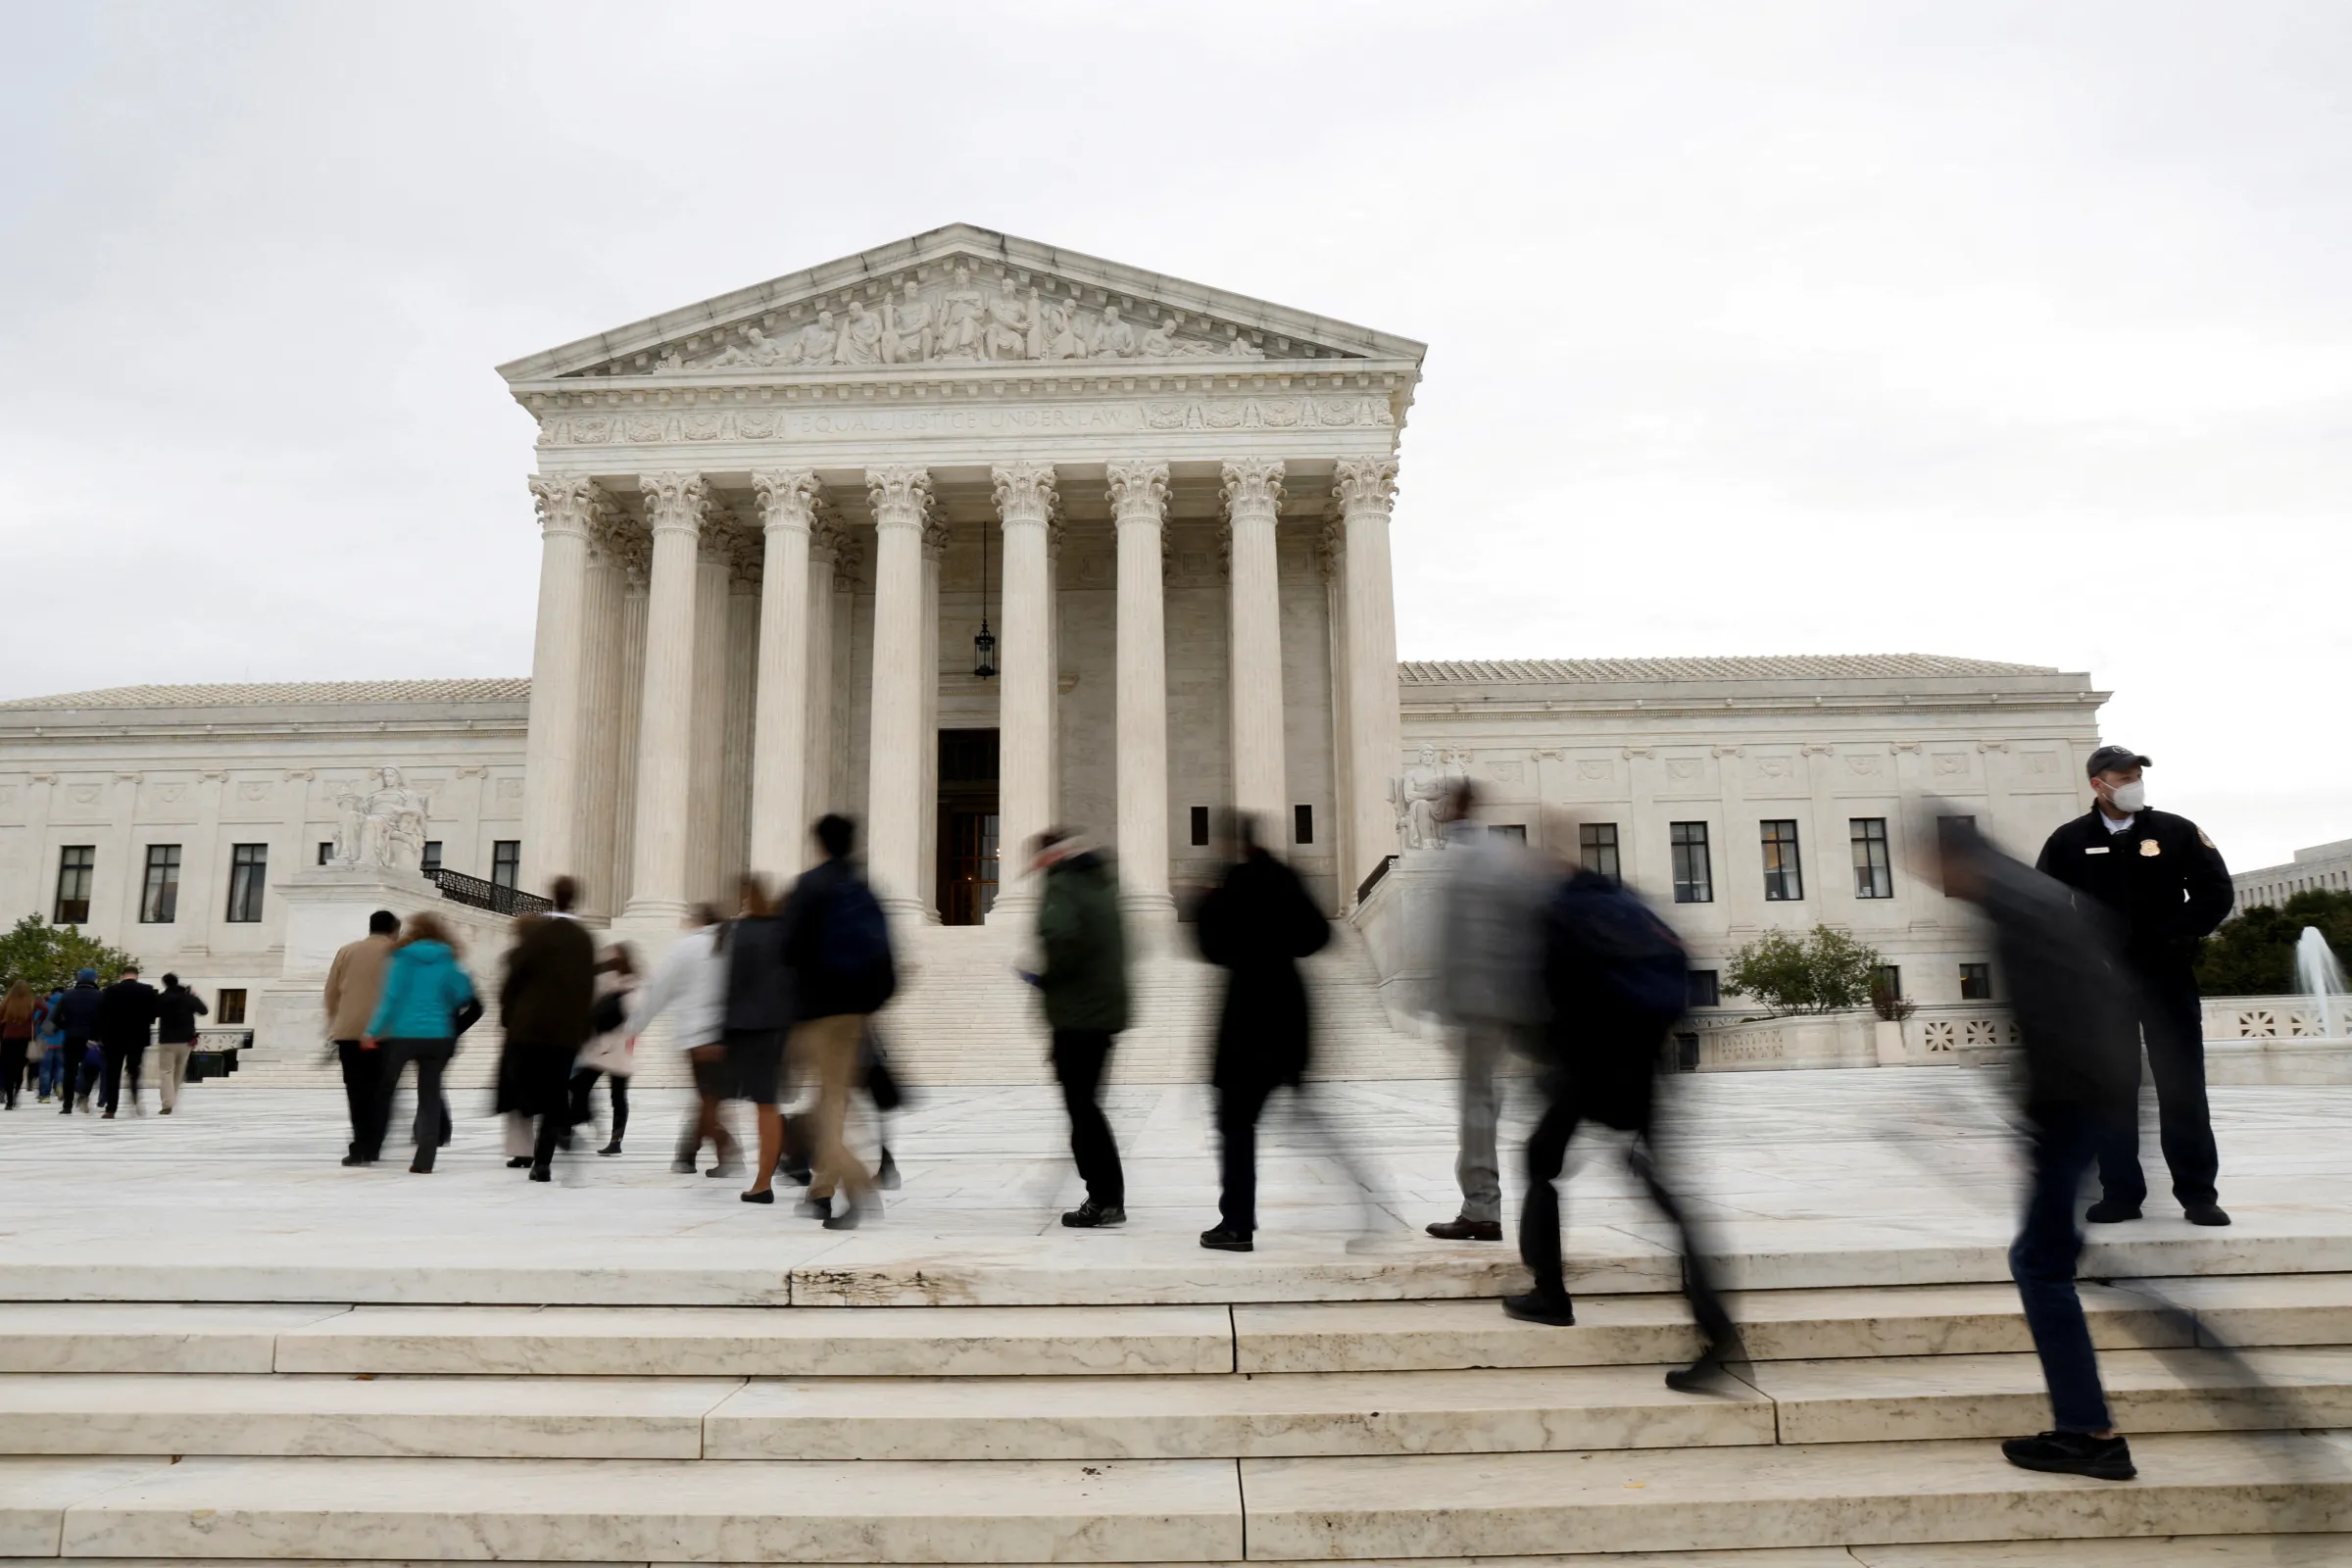 People walk across the plaza to enter the U.S. Supreme Court building on the first day of the court's new term in Washington, U.S. October 3, 2022